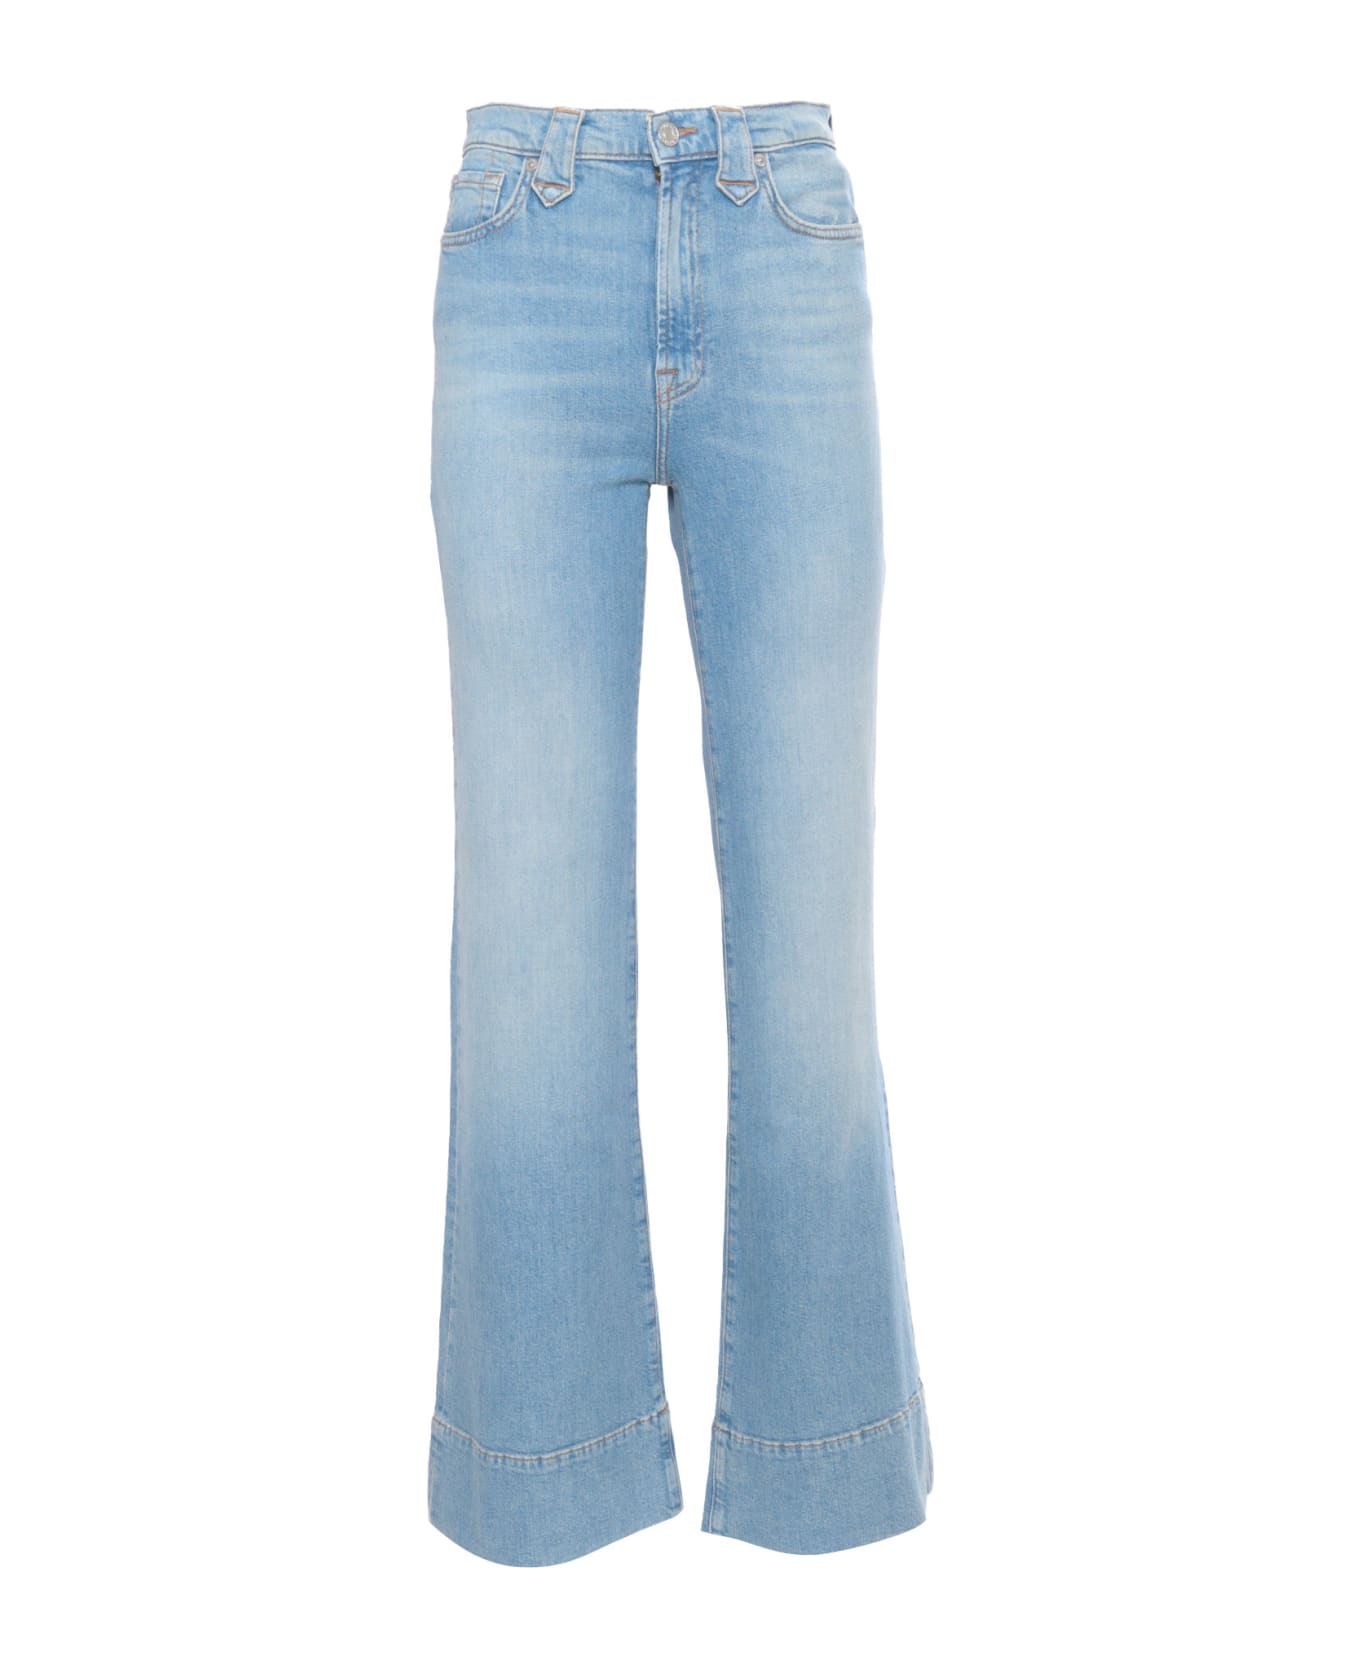 7 For All Mankind Women's Flared Jeans - BLUE